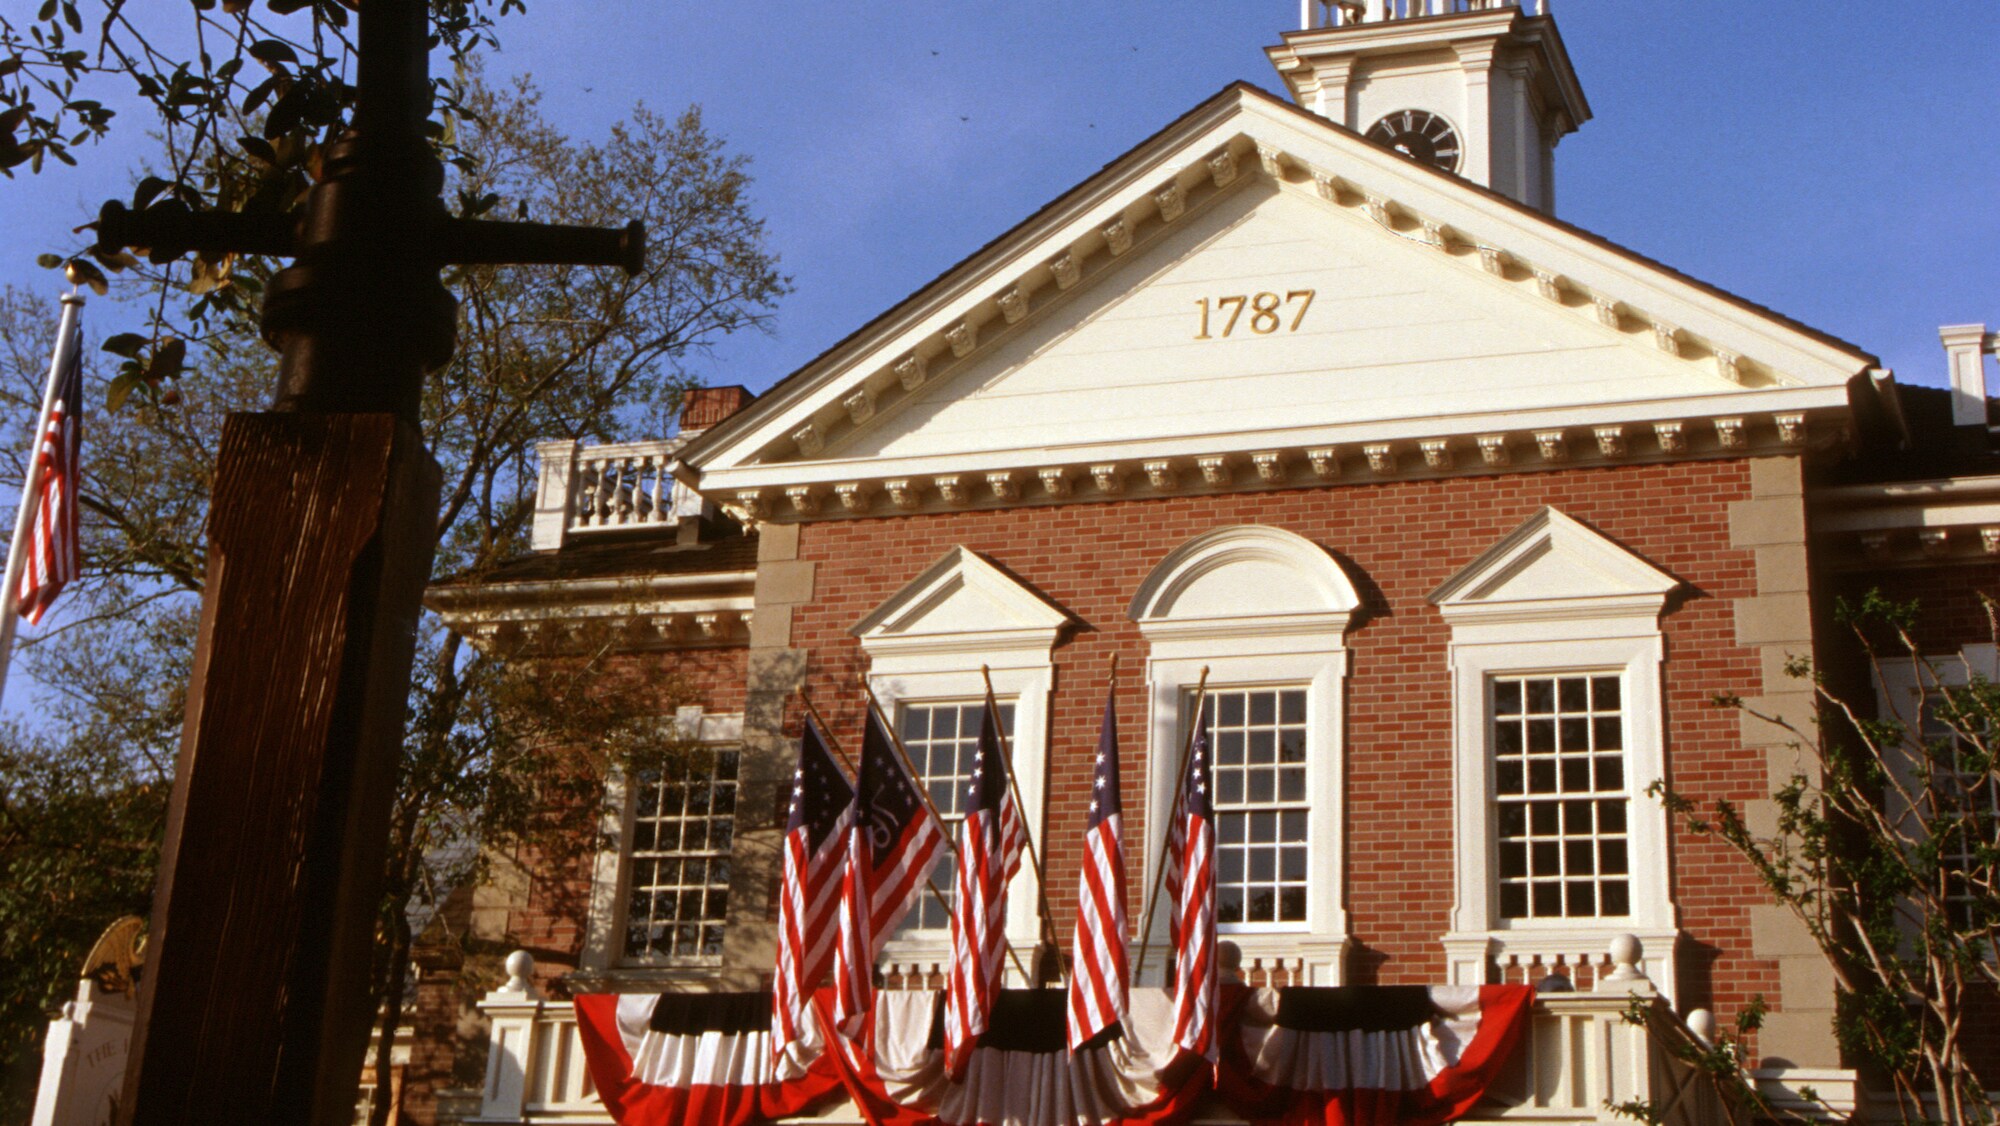 Image of The Hall of Presidents building exterior displaying American flags.